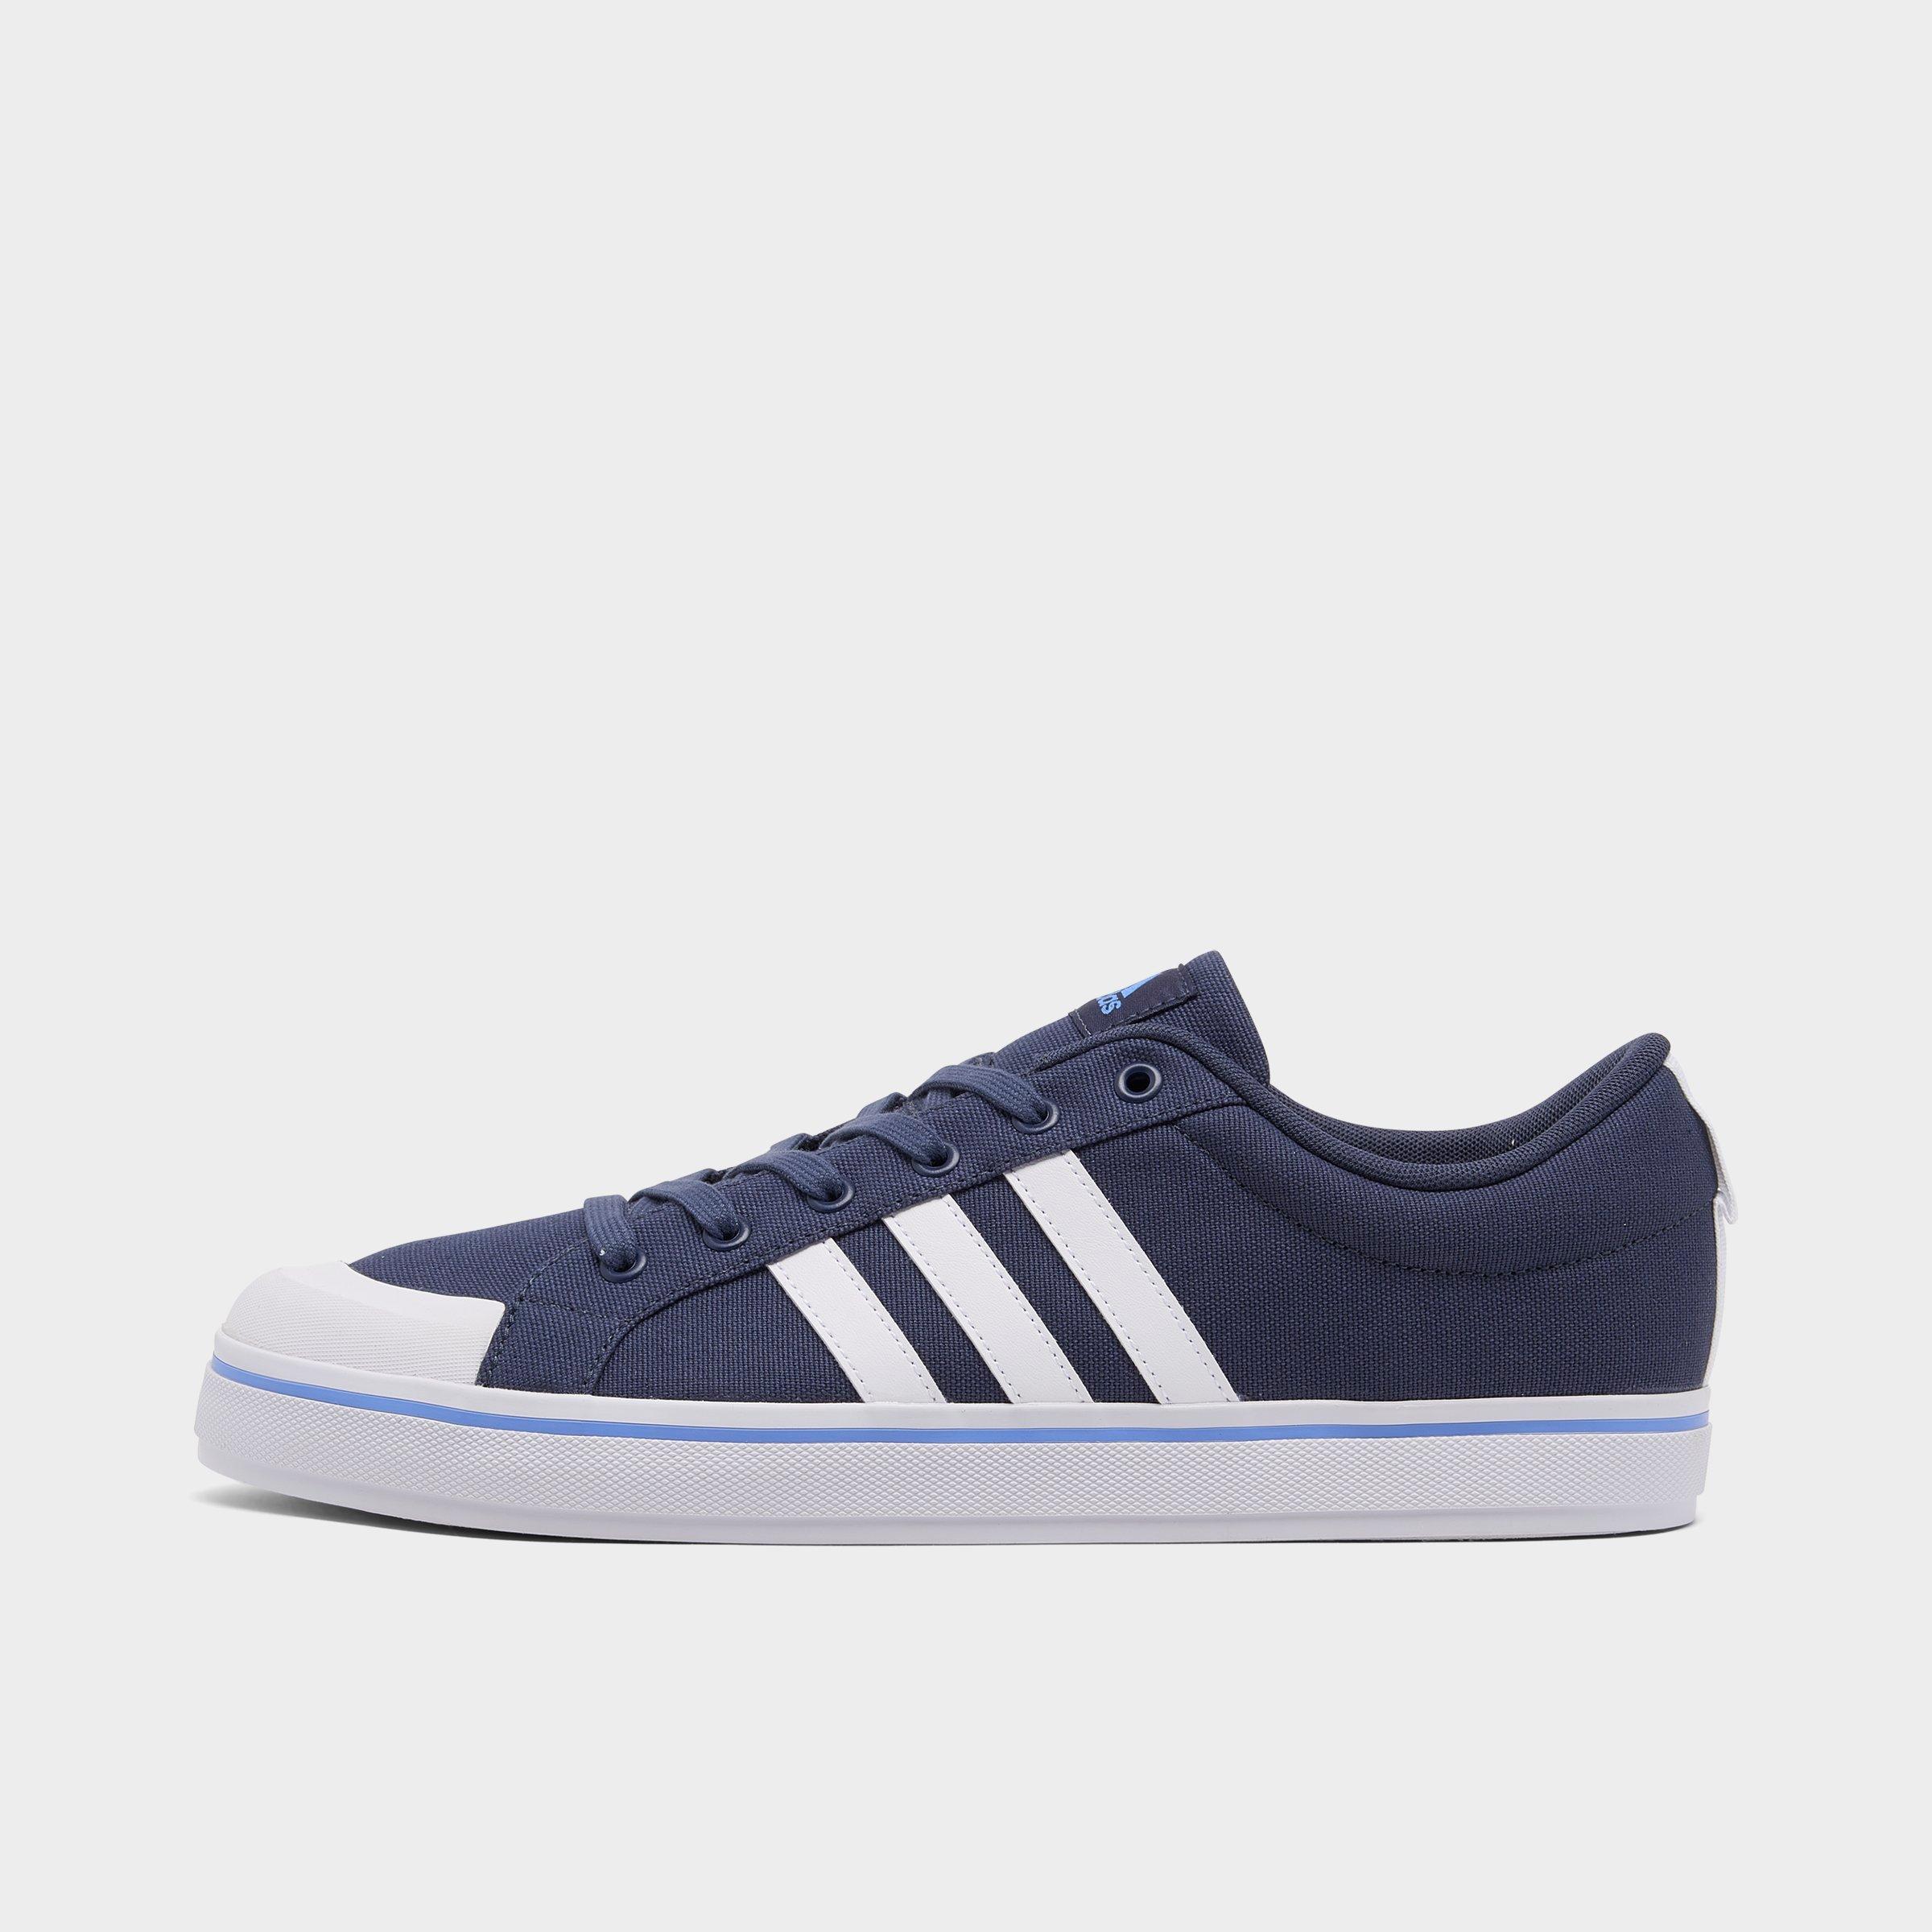 Adidas Originals Adidas Men's Bravada 2.0 Low Casual Sneakers From Finish Line In Shadow Navy/cloud White/blue Fusion